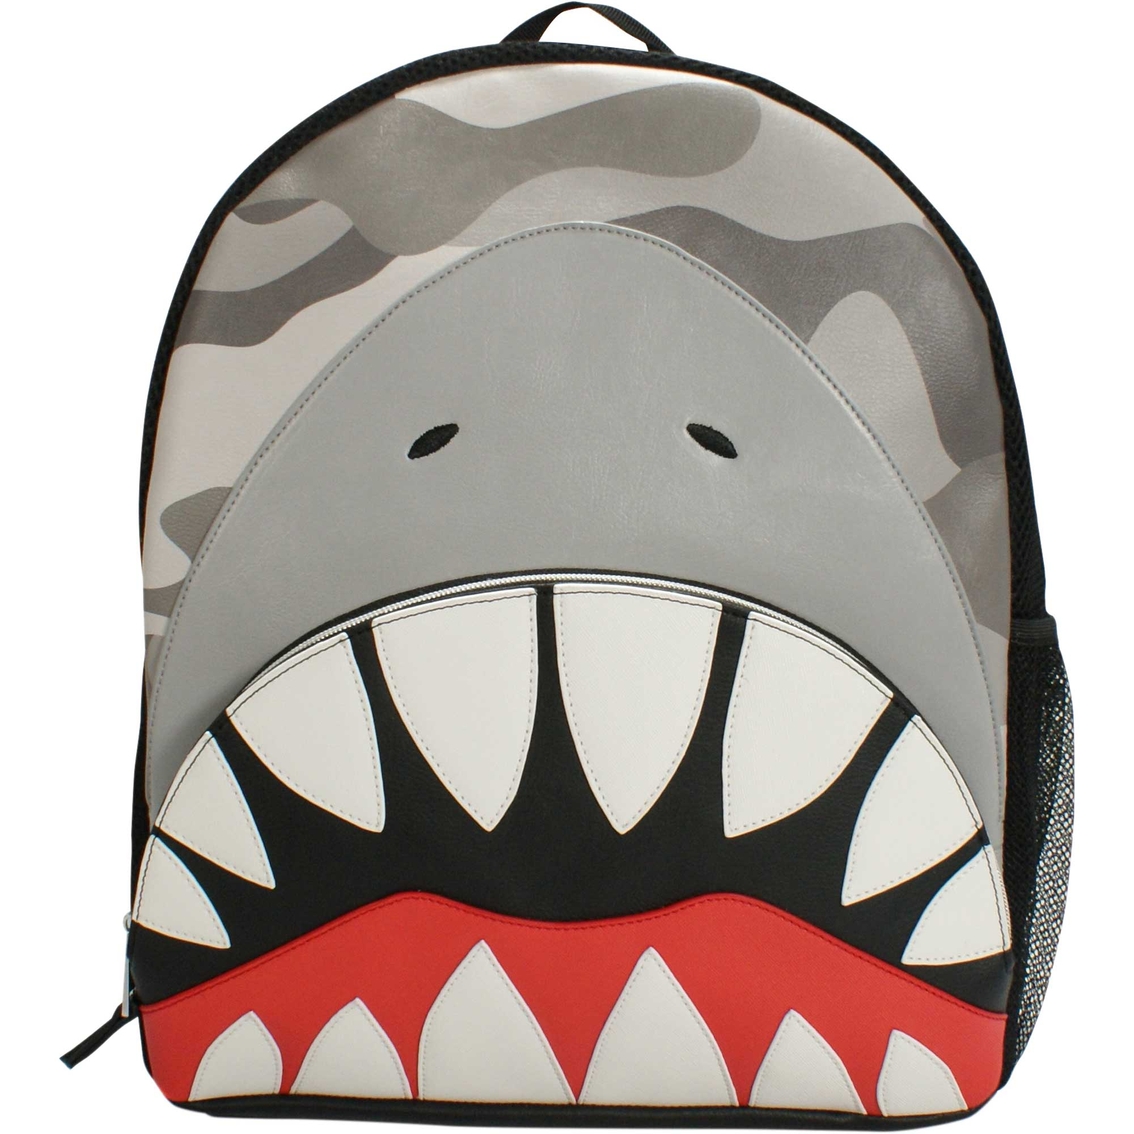 OMG Accessories Shark Checkerboard Lunch Bag